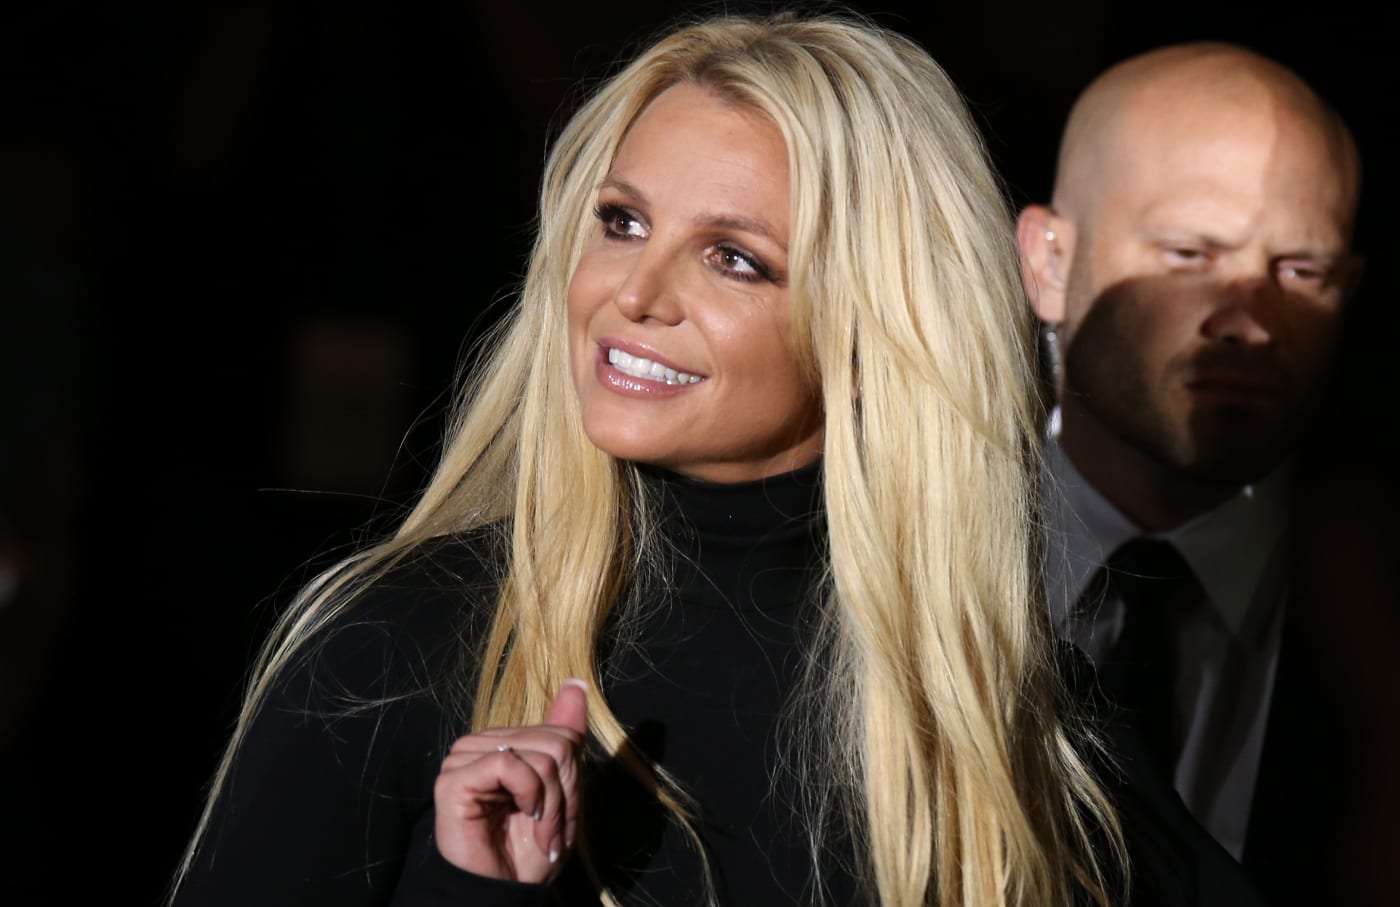 “Free Britney” — Britney Spears Conservatorship and Free Britney Movement